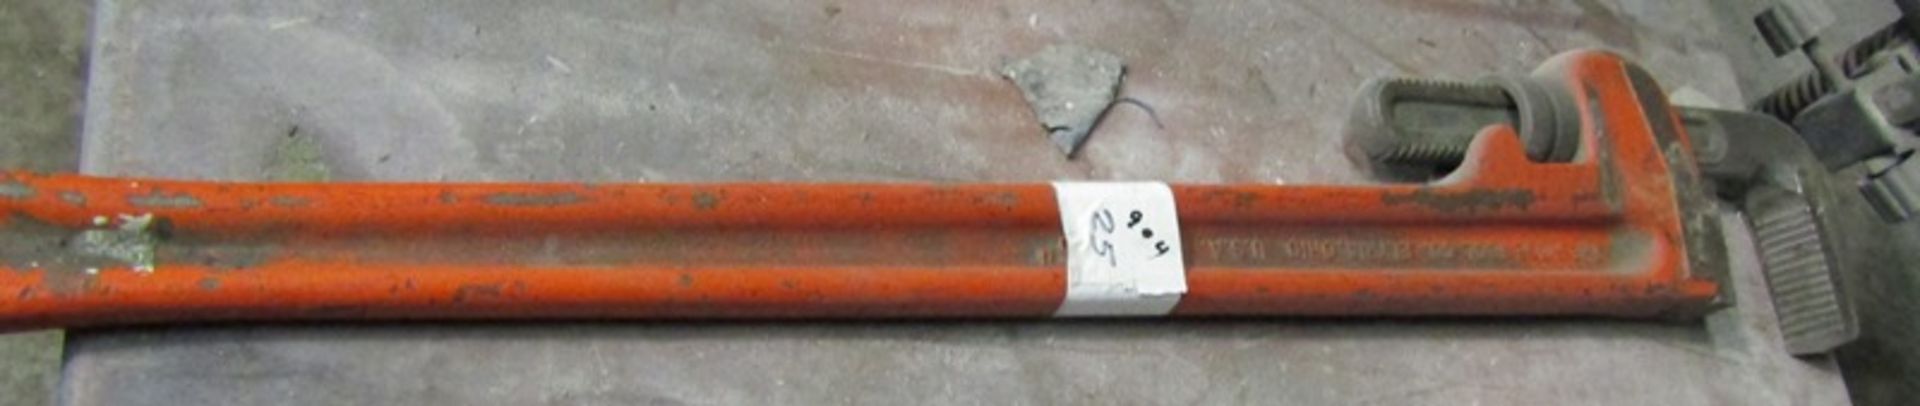 36” Pipe Wrench - Image 2 of 2